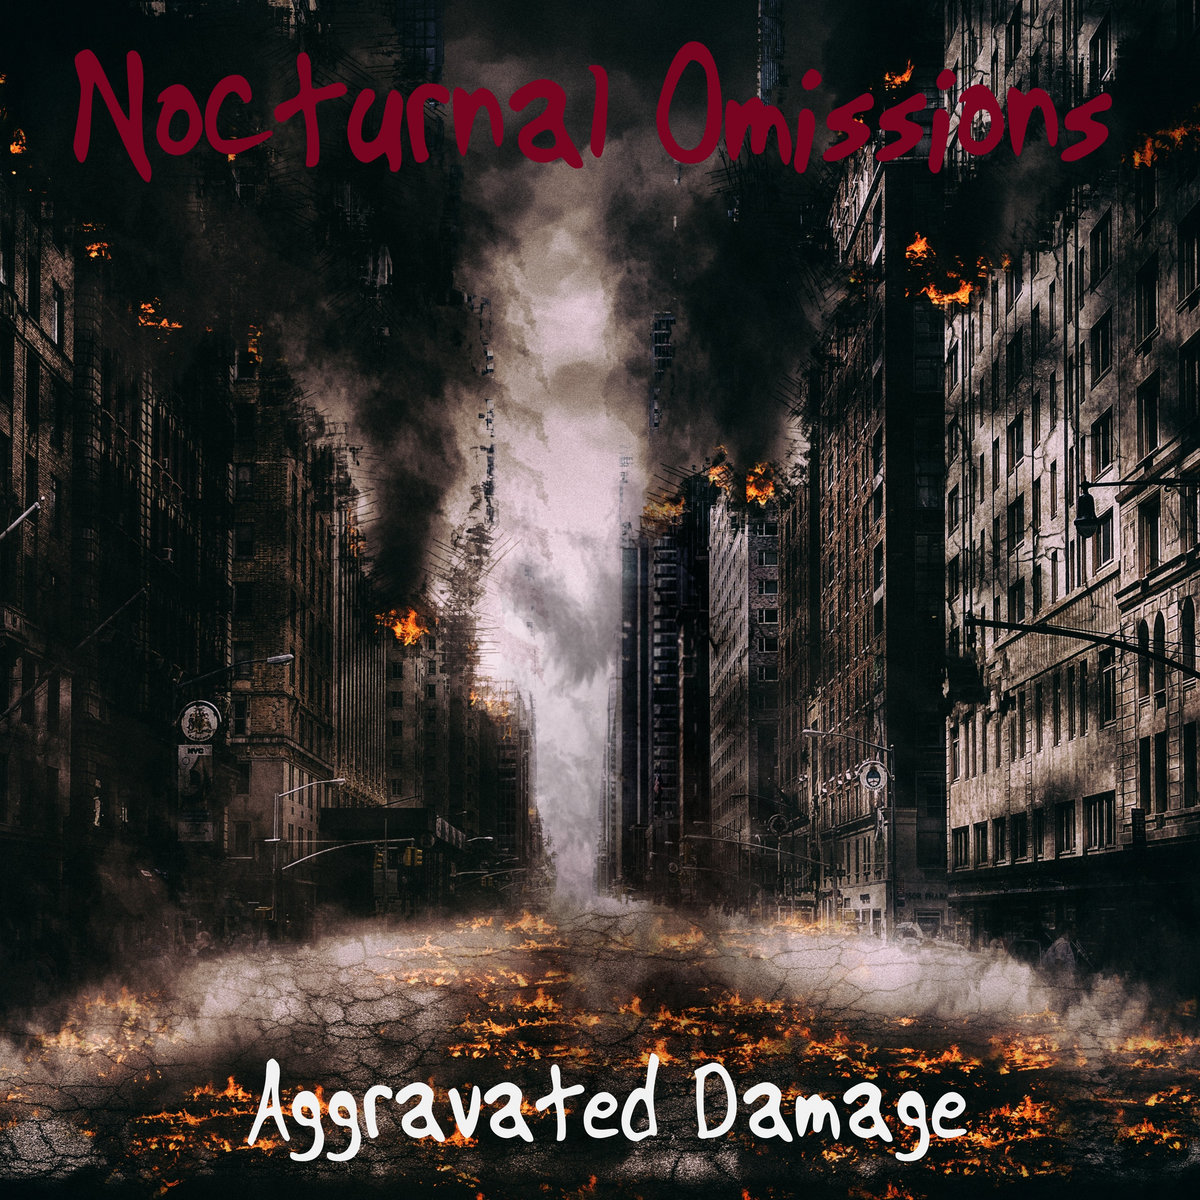 “Aggravated Damage” is an Experimental Experience